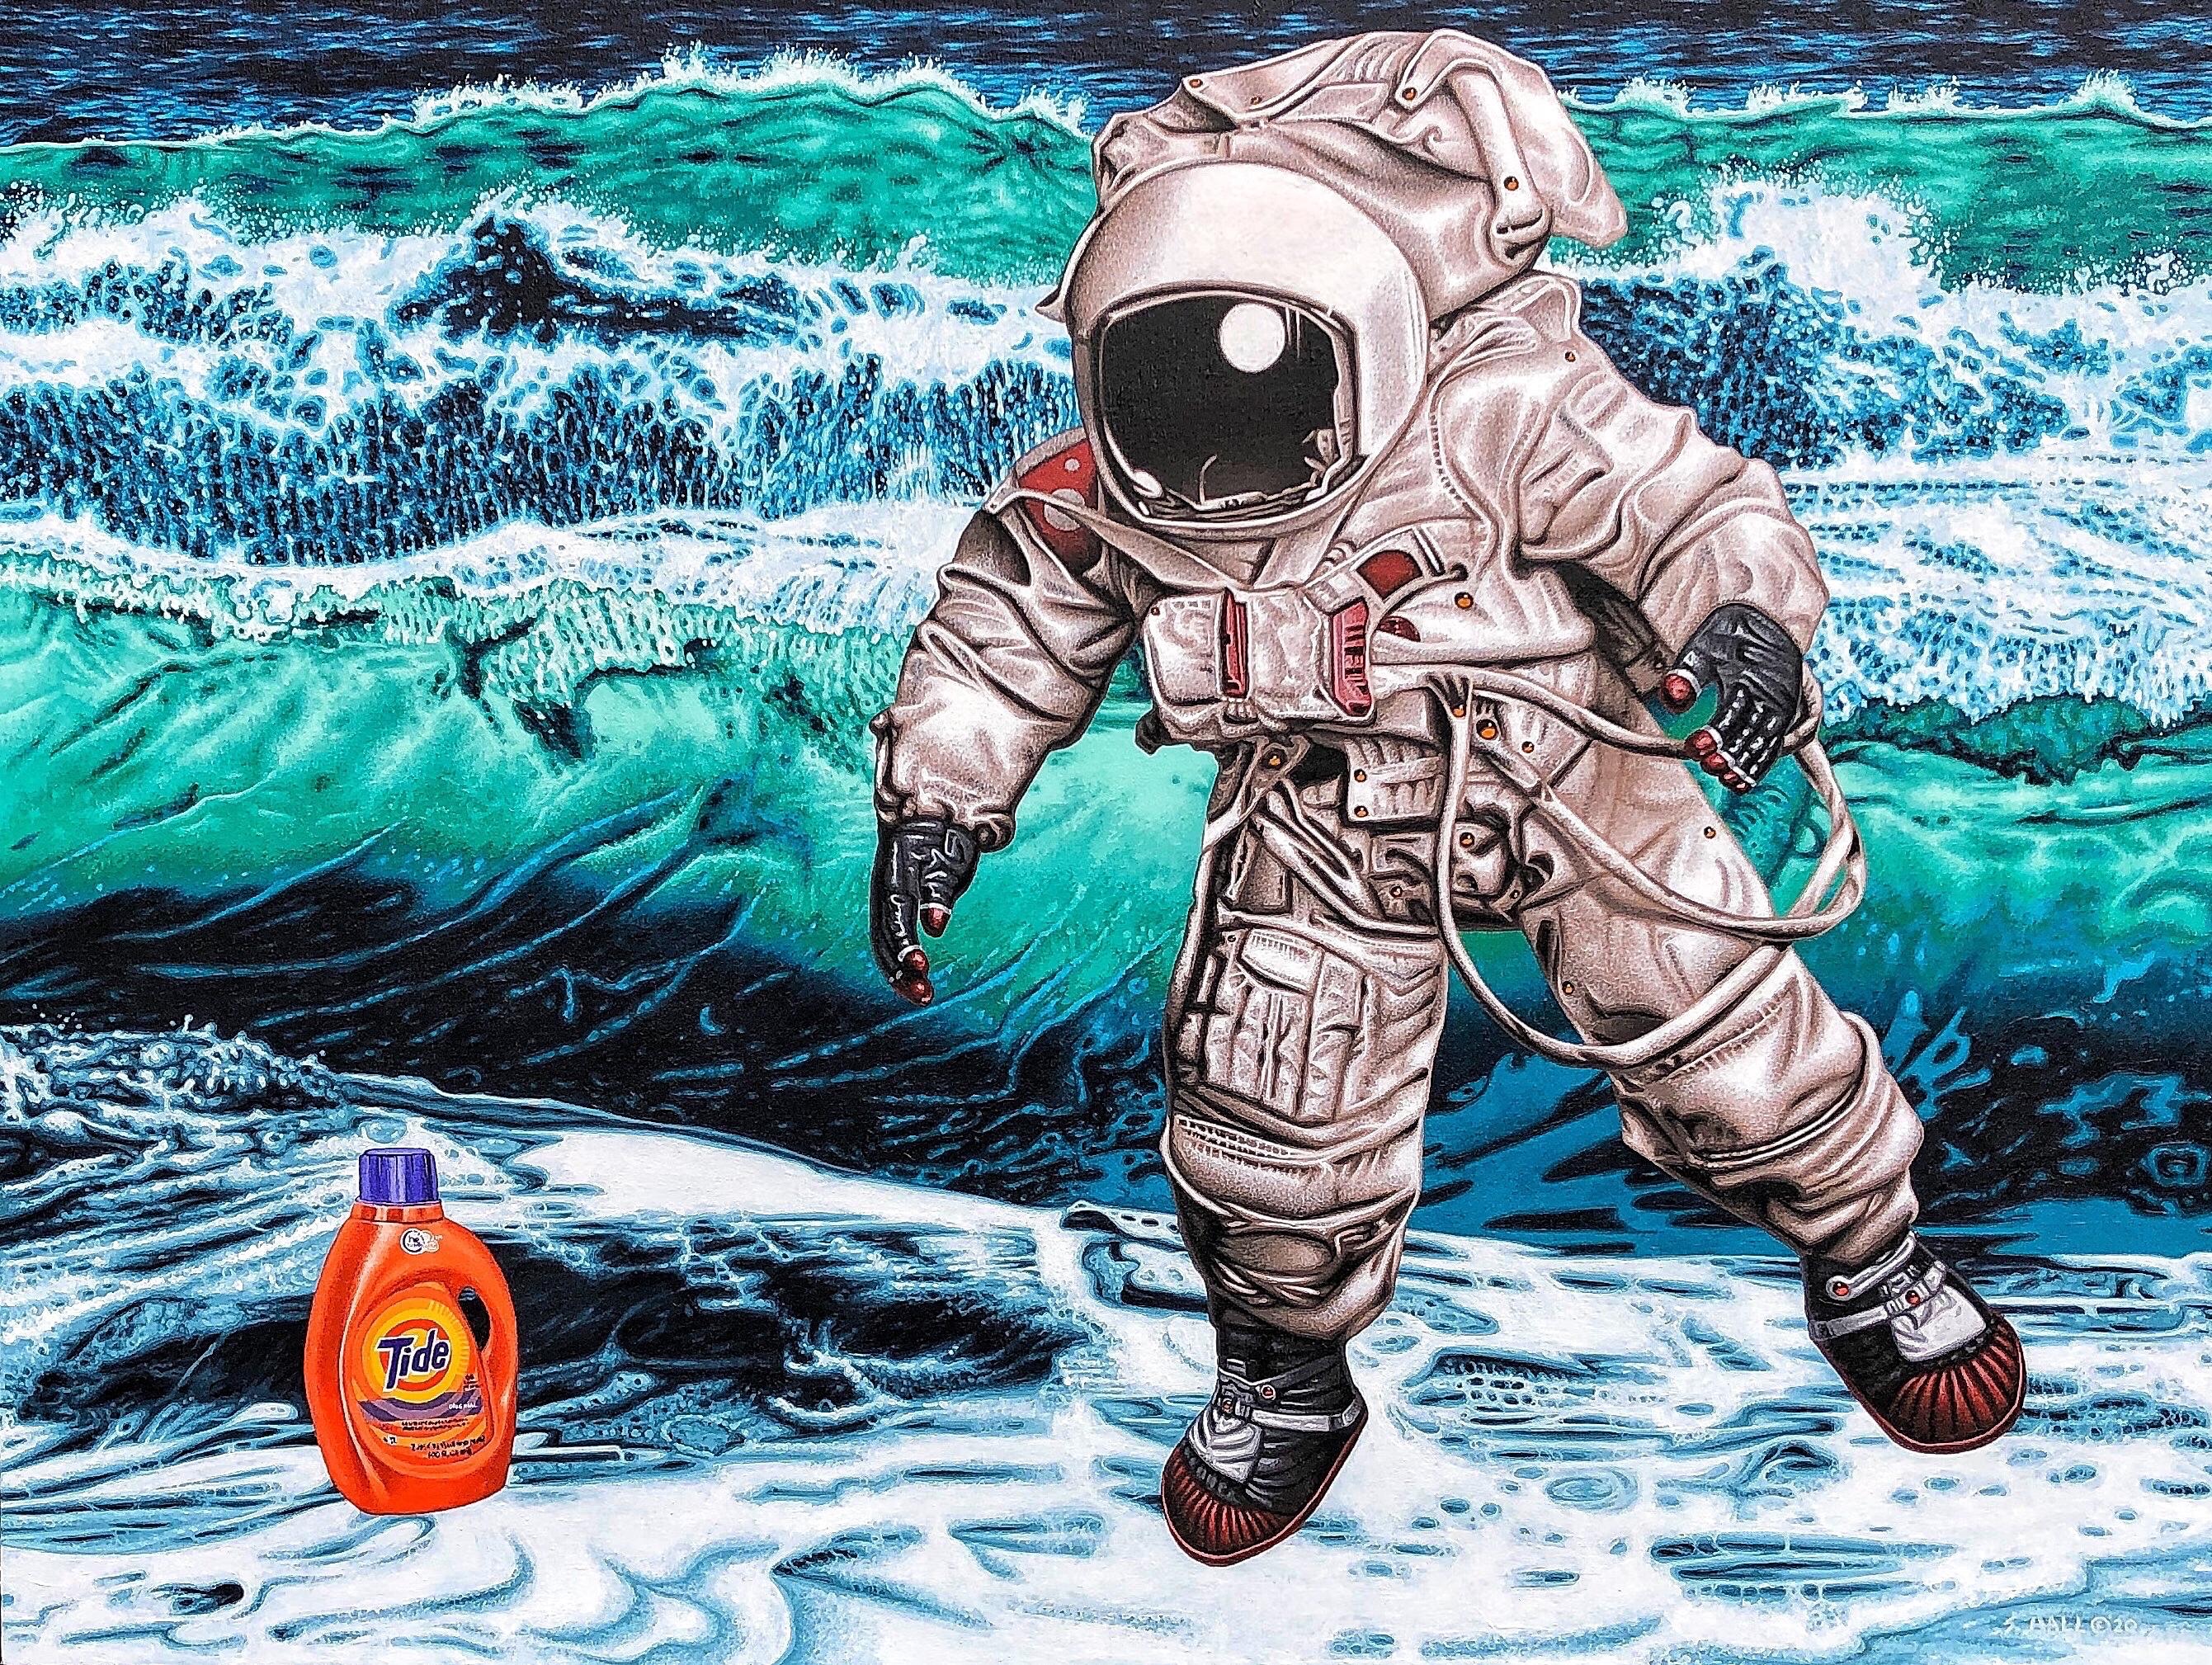 Stephen Hall Portrait Painting - The Search for Intelligent Life on Earth